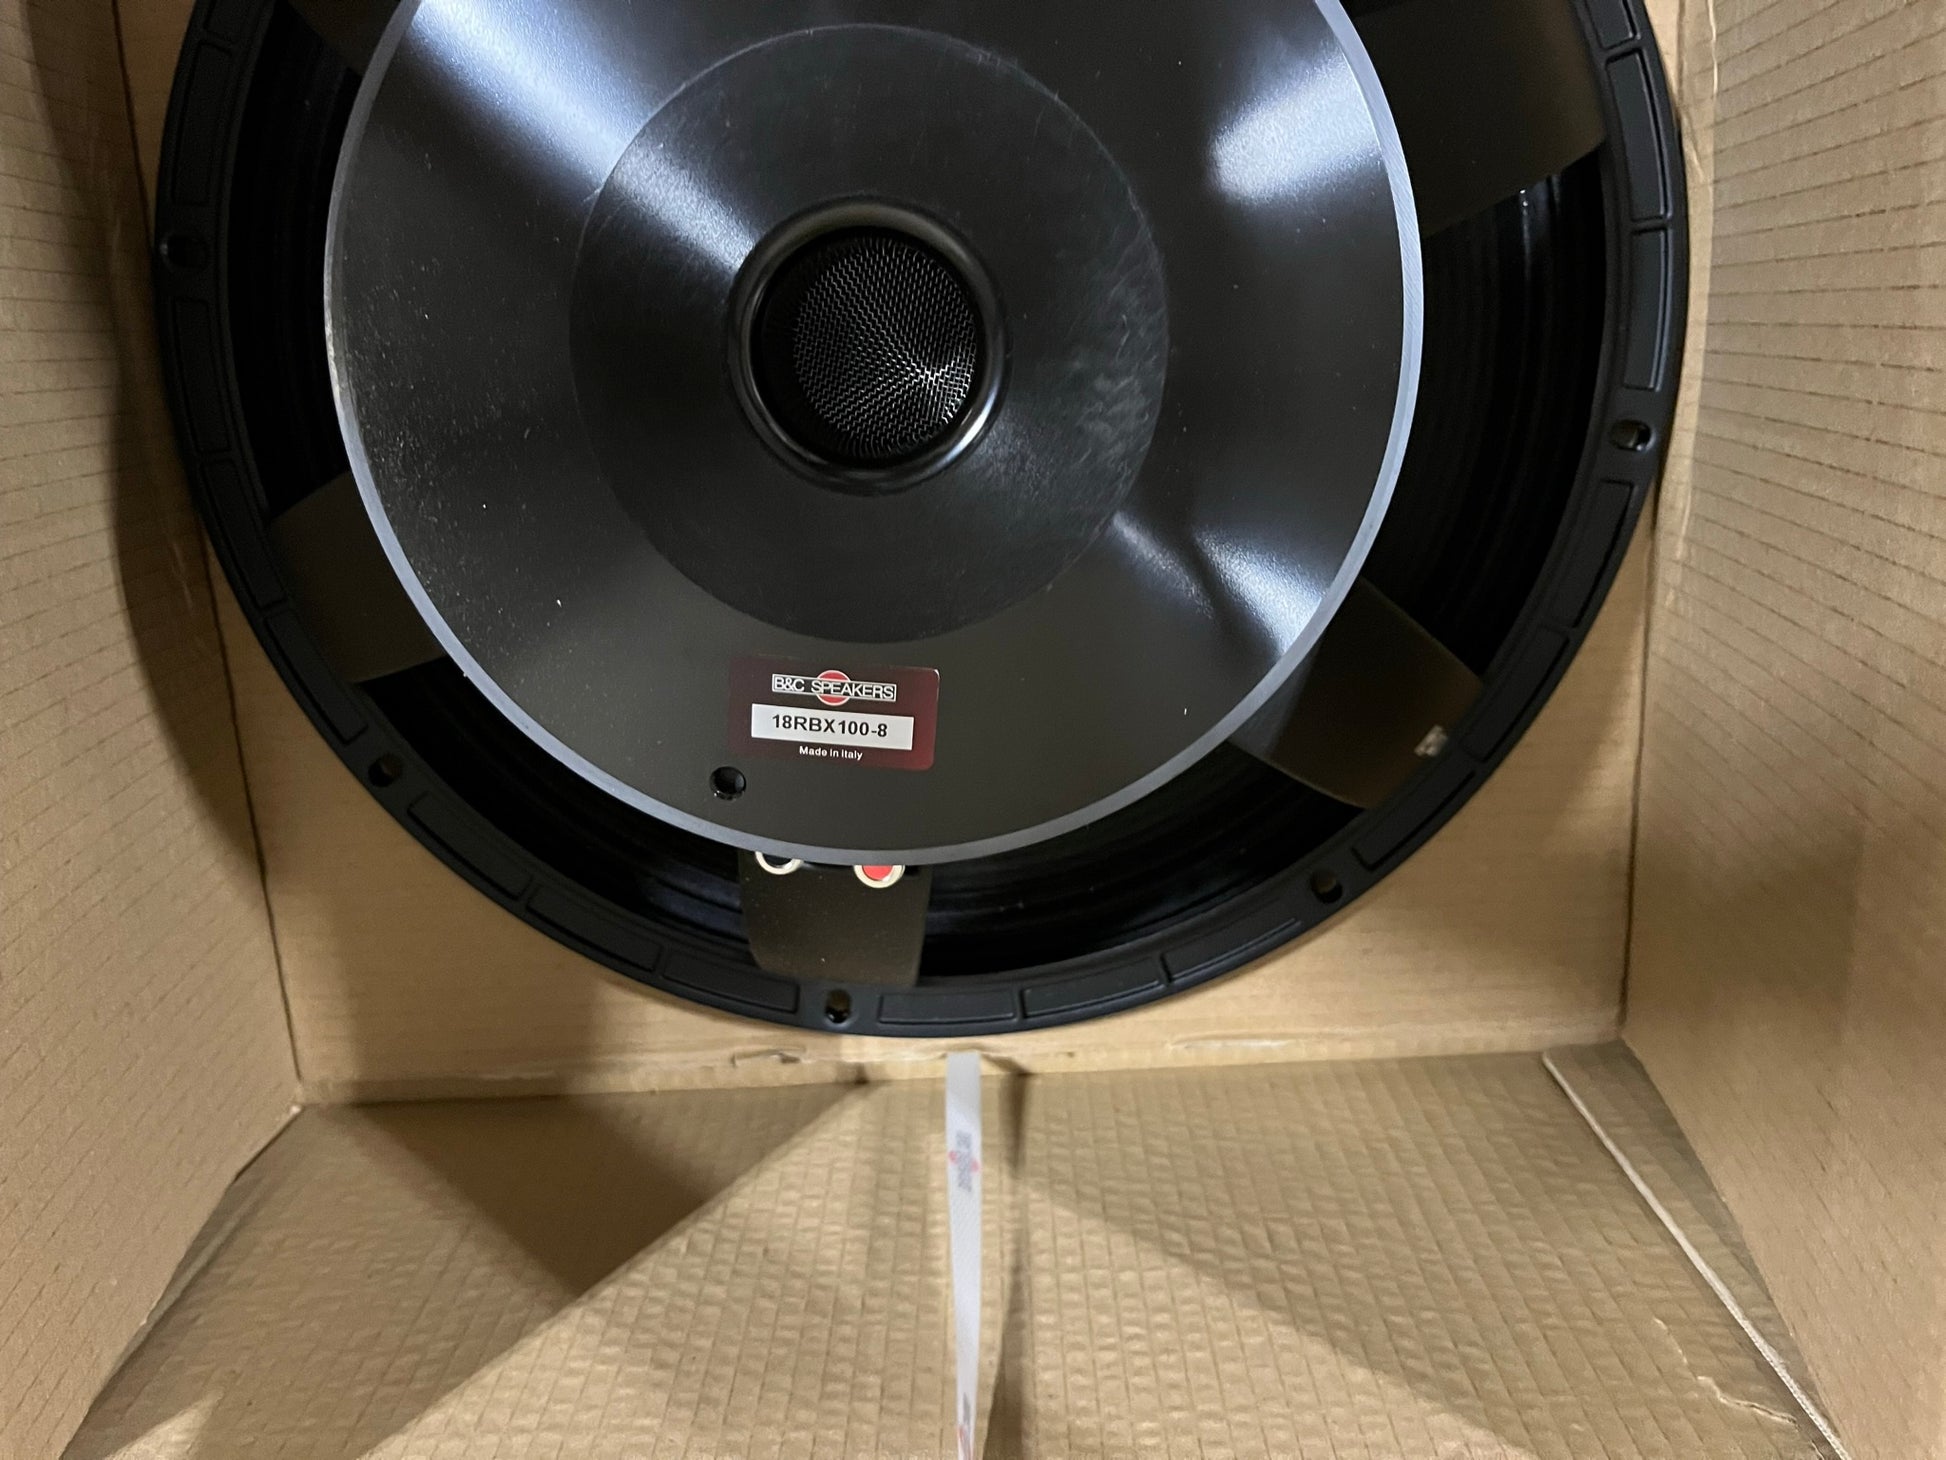 New B&C Speakers 18RBX100-8& for Sale. We Sell Professional Audio Equipment. Audio Systems, Amplifiers, Consoles, Mixers, Electronics, Entertainment, Sound, Live.